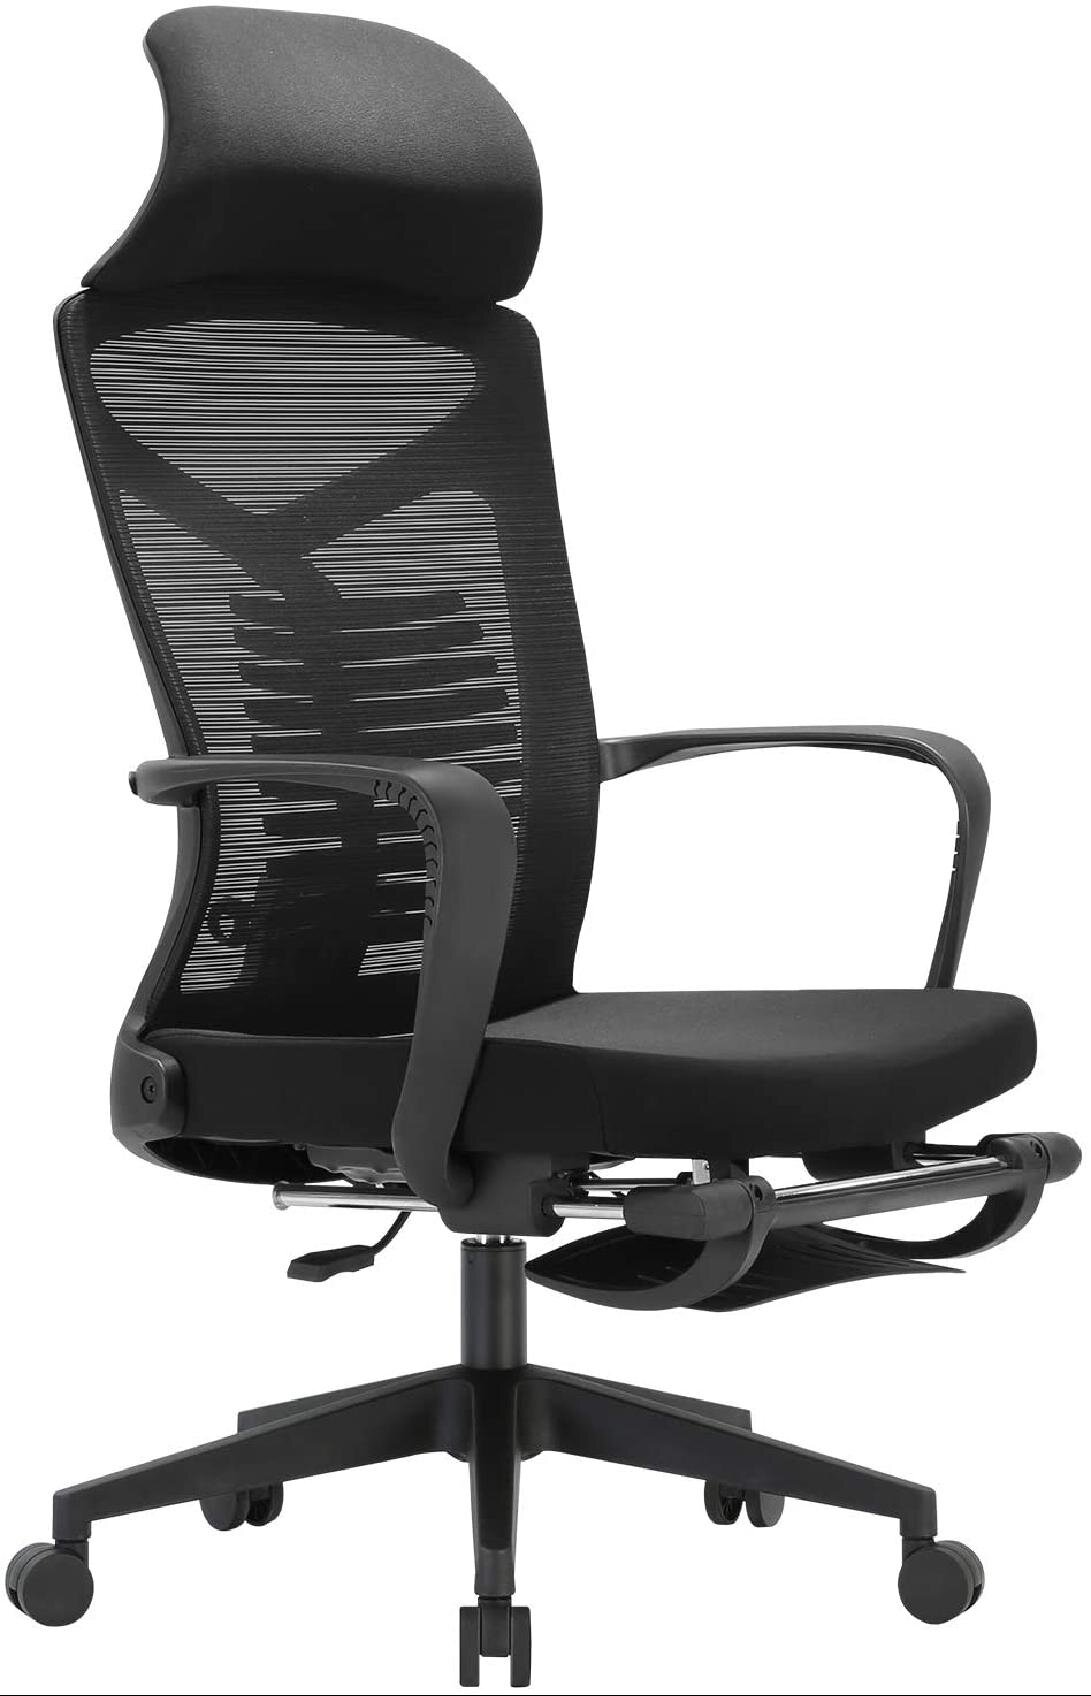 Mesh Seat and Back Chair Ergonomic Office Chair Computer Desk Chair 